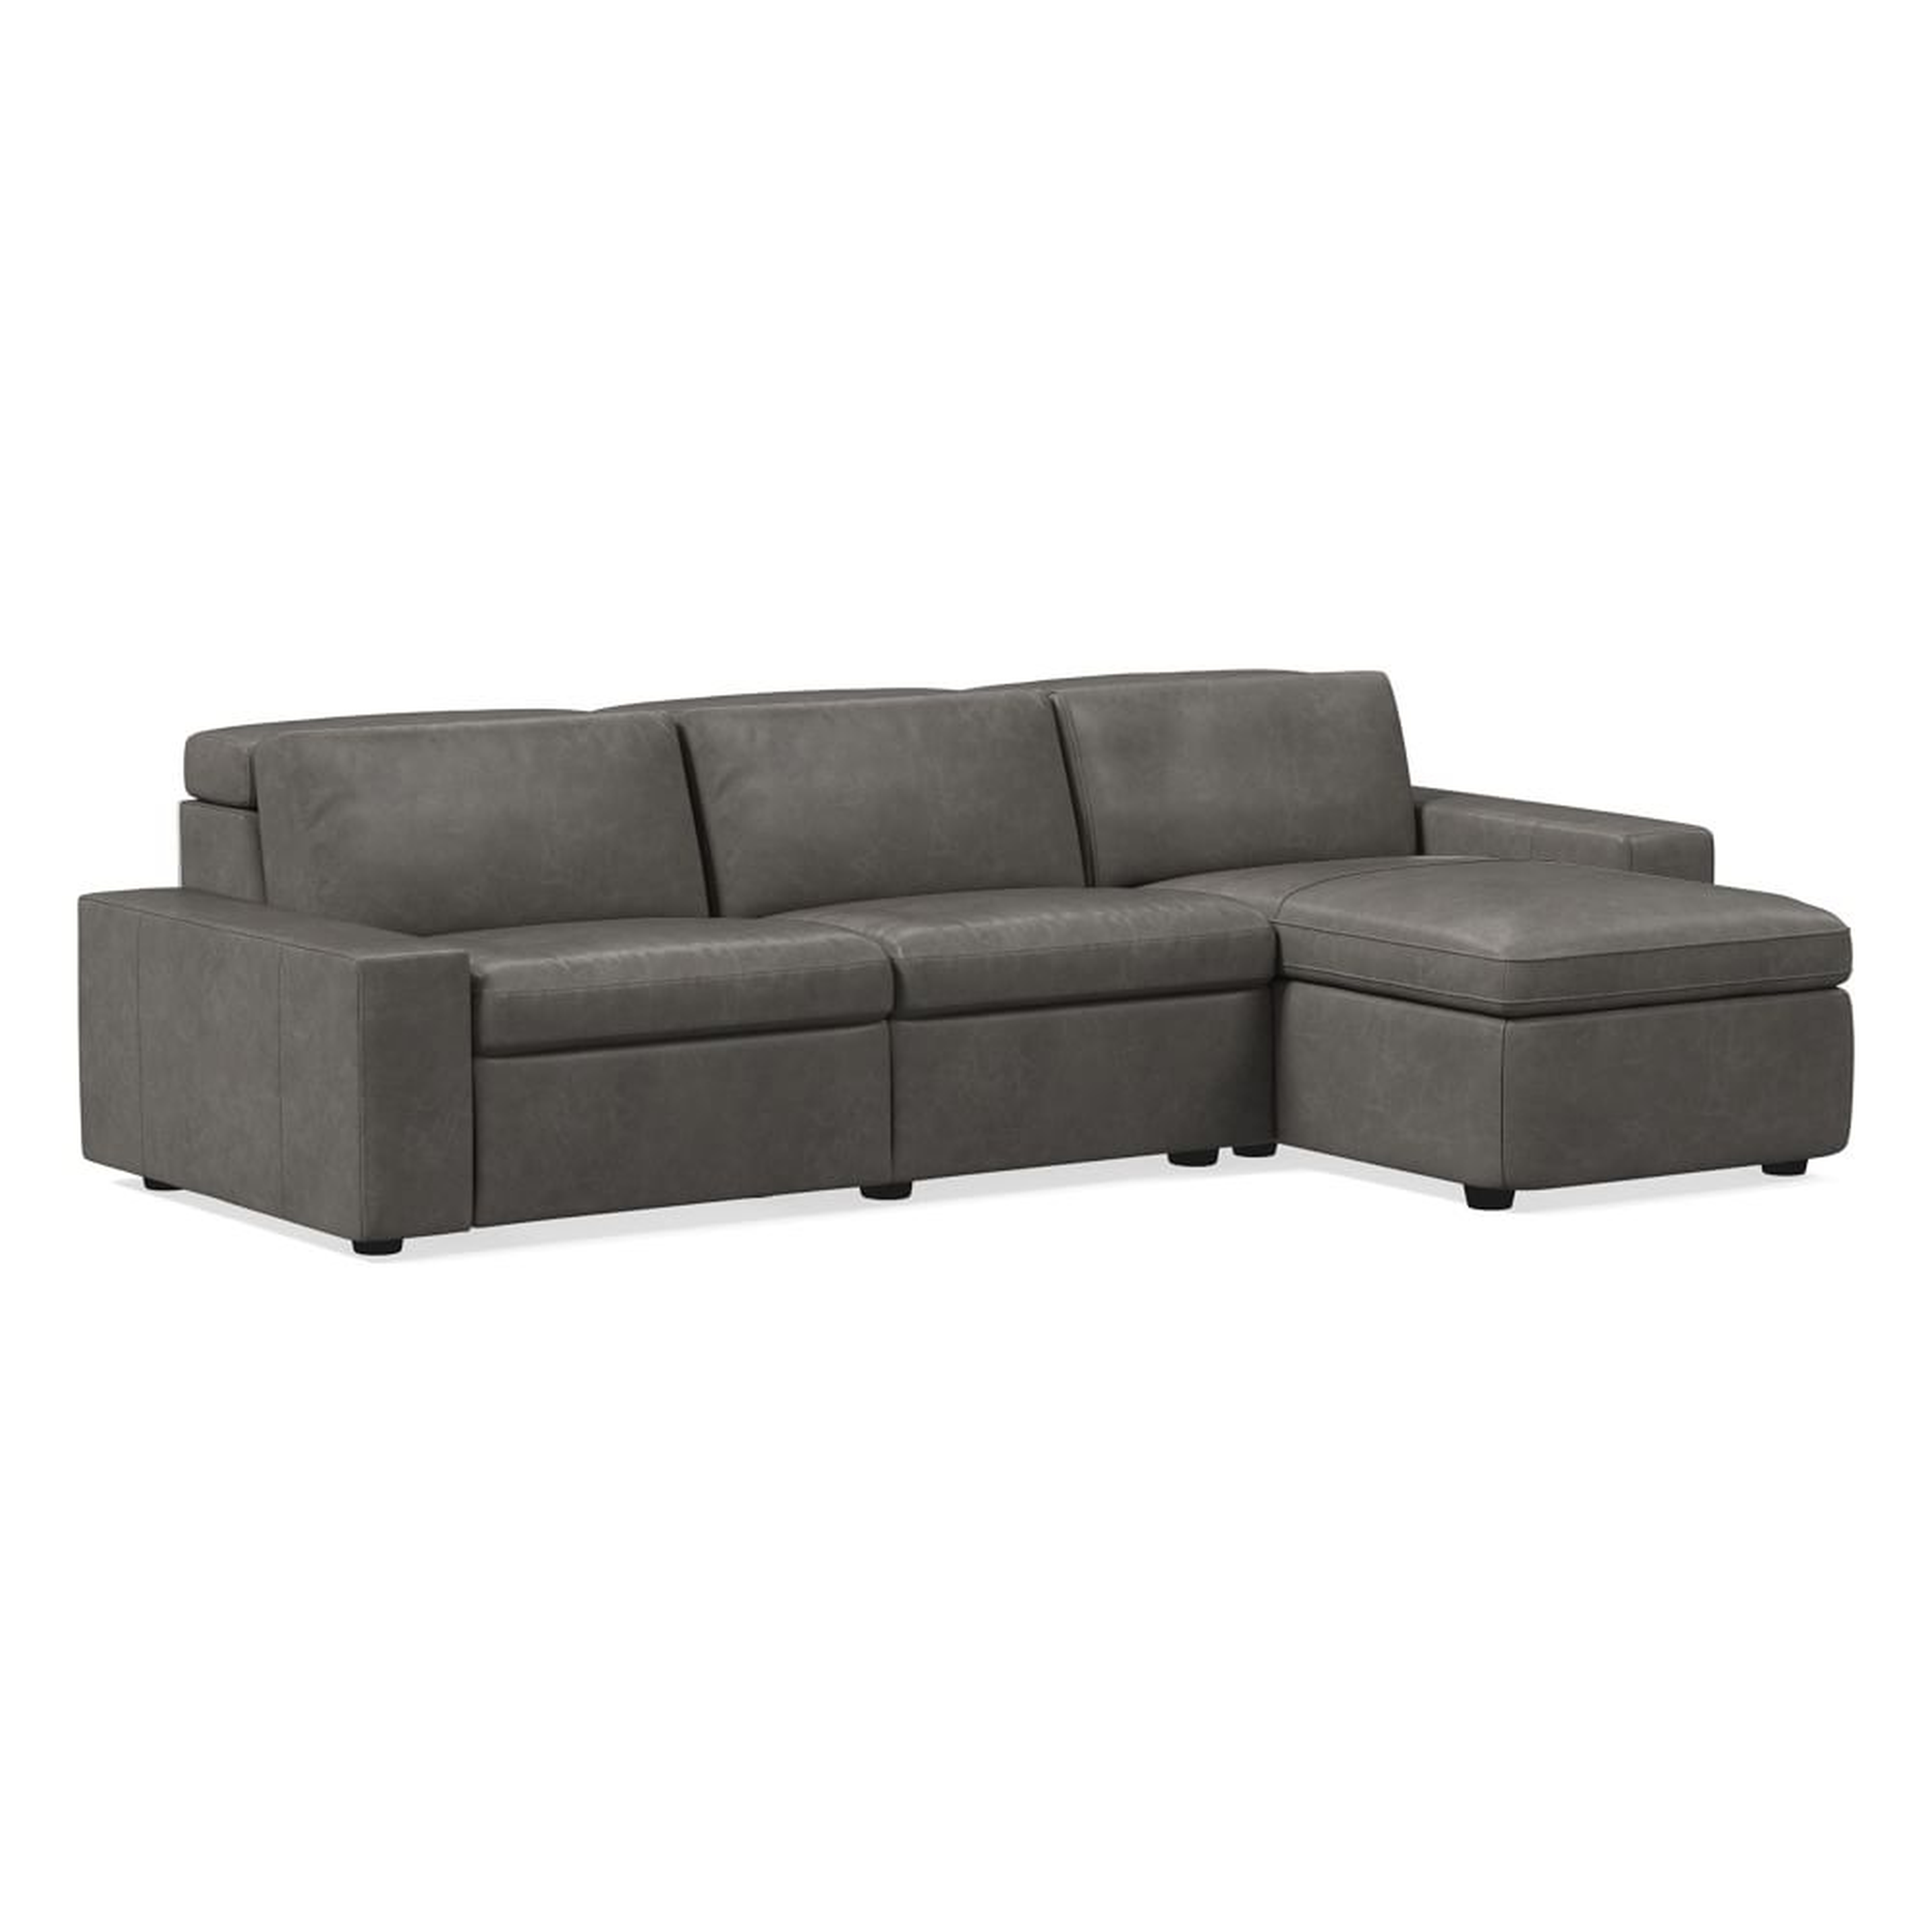 Enzo 108" 3-Piece Reclining Chaise Sectional w/ Storage, Two Basic Arms, Ludlow Leather, Gray Smoke - West Elm